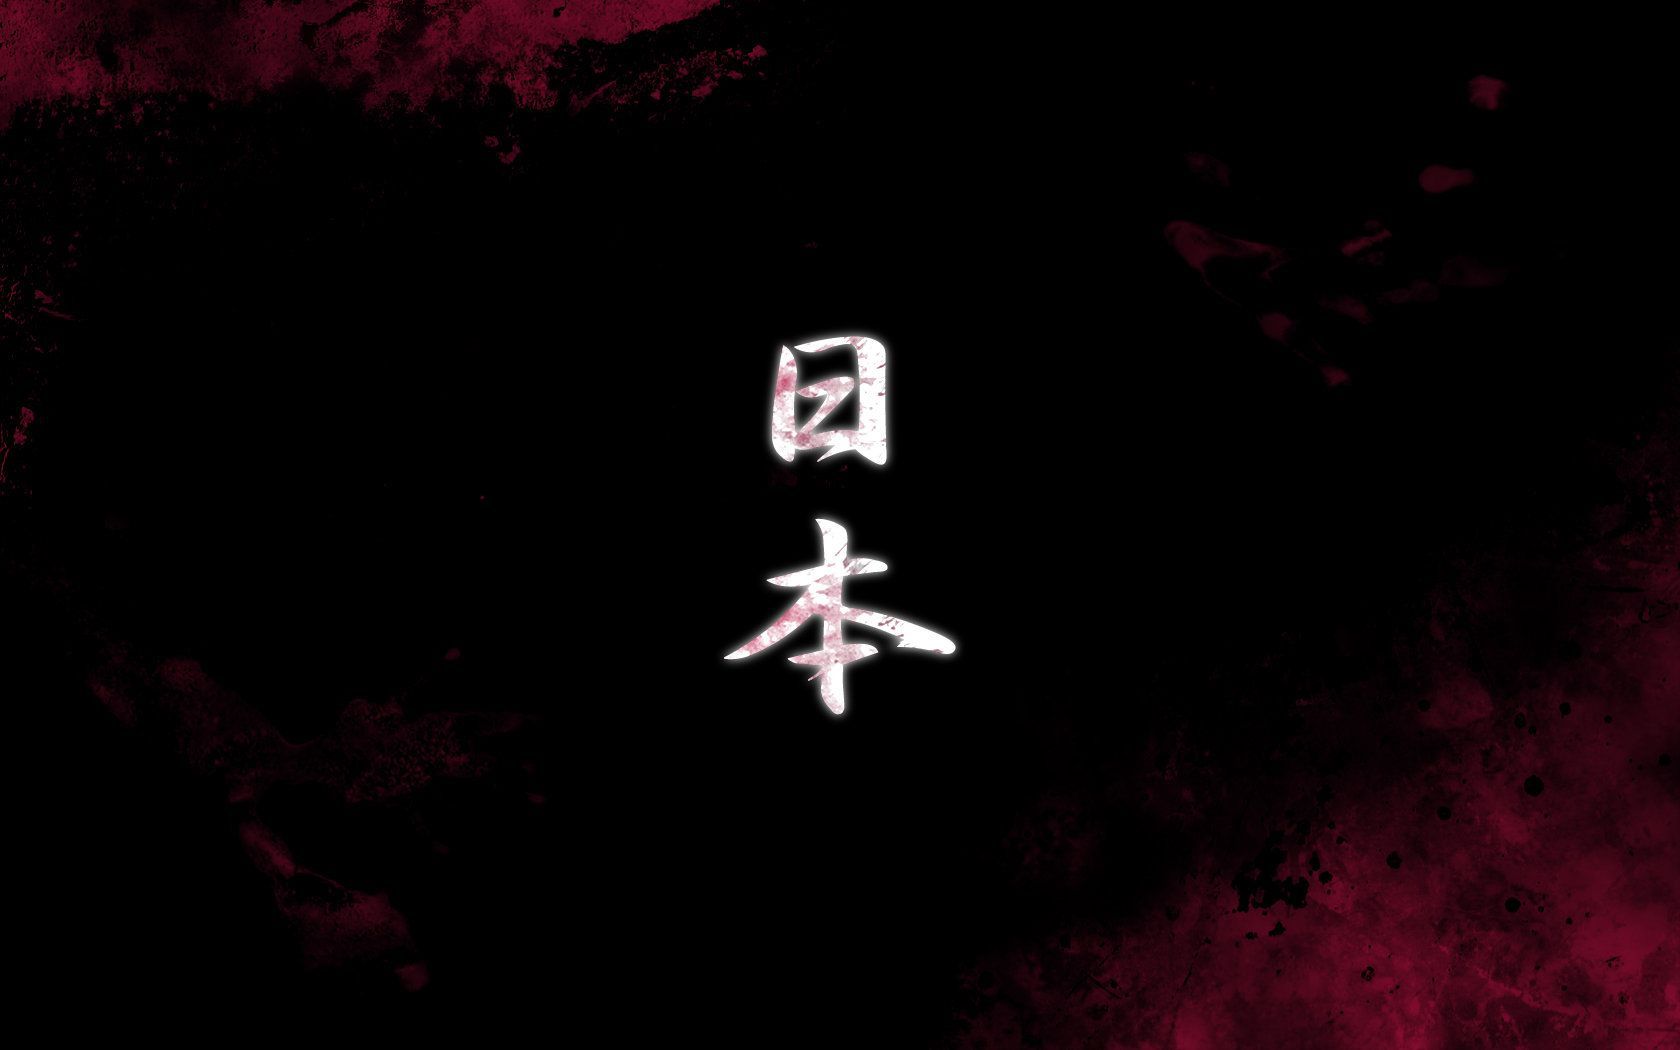 Black and Red Japanese Wallpaper Free Black and Red Japanese Background